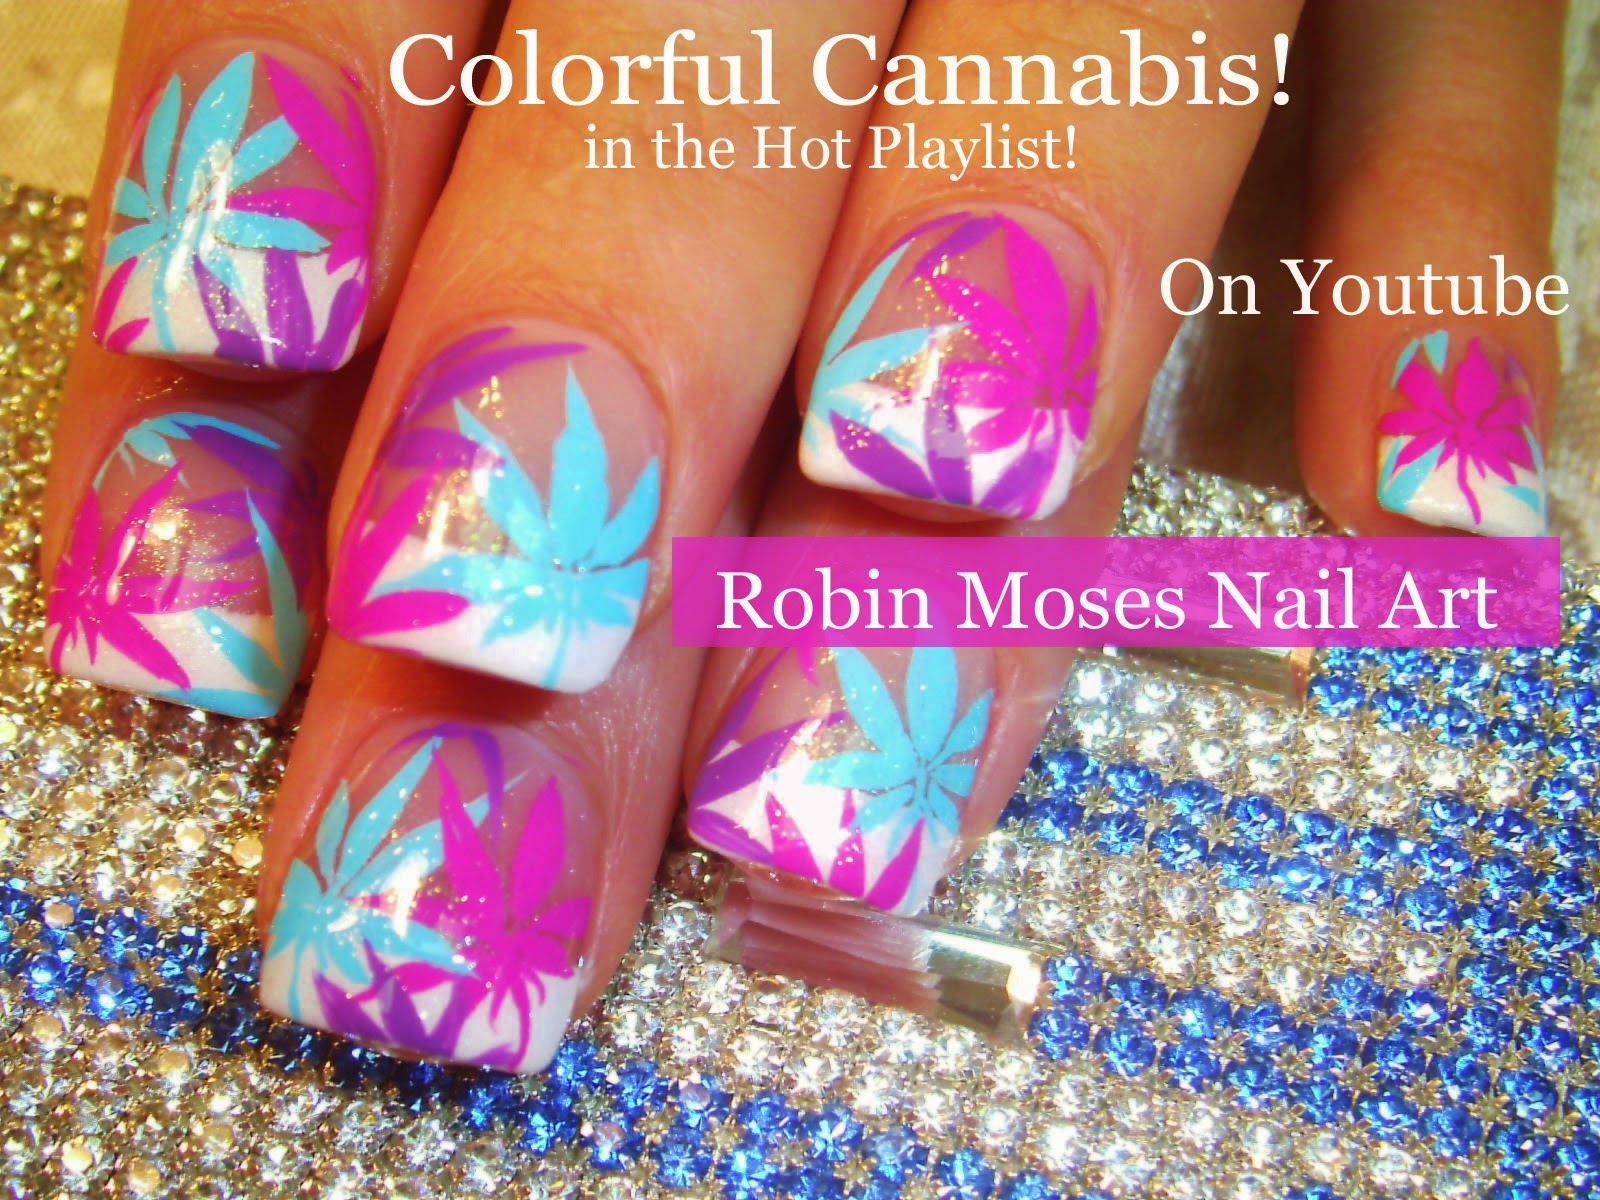 4. "Pot Leaf Nail Decals" - wide 8